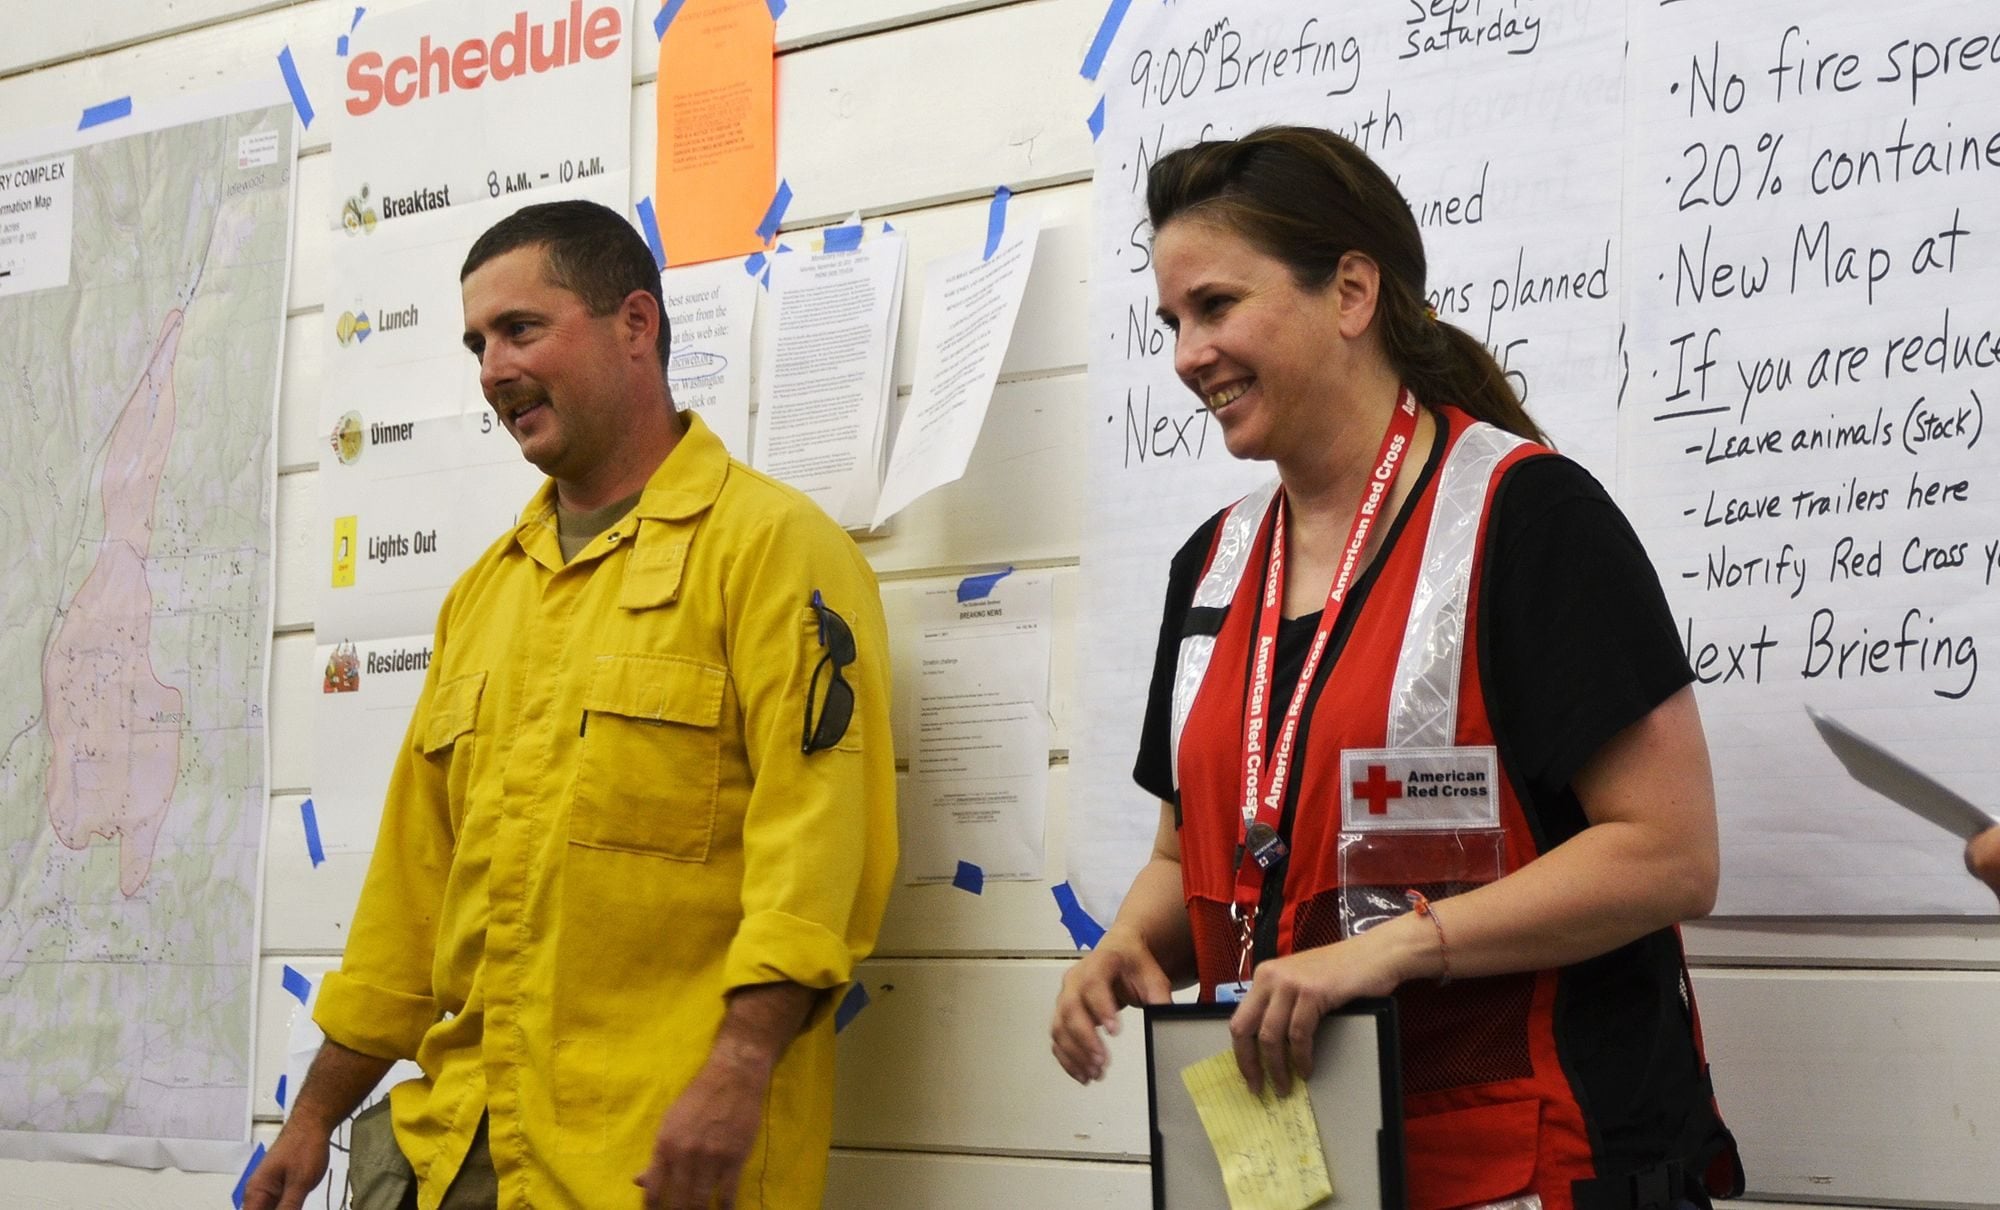 Fourth Plain Village: Dave LaFave, incident team commander and fire chief for Cowlitz 2 Fire and Rescue in Kelso, left, offered Kelly Anderson, director of Emergency Services for the Southwest Washington chapter of the American Red Cross, the Excellence in Service Award on Sept.